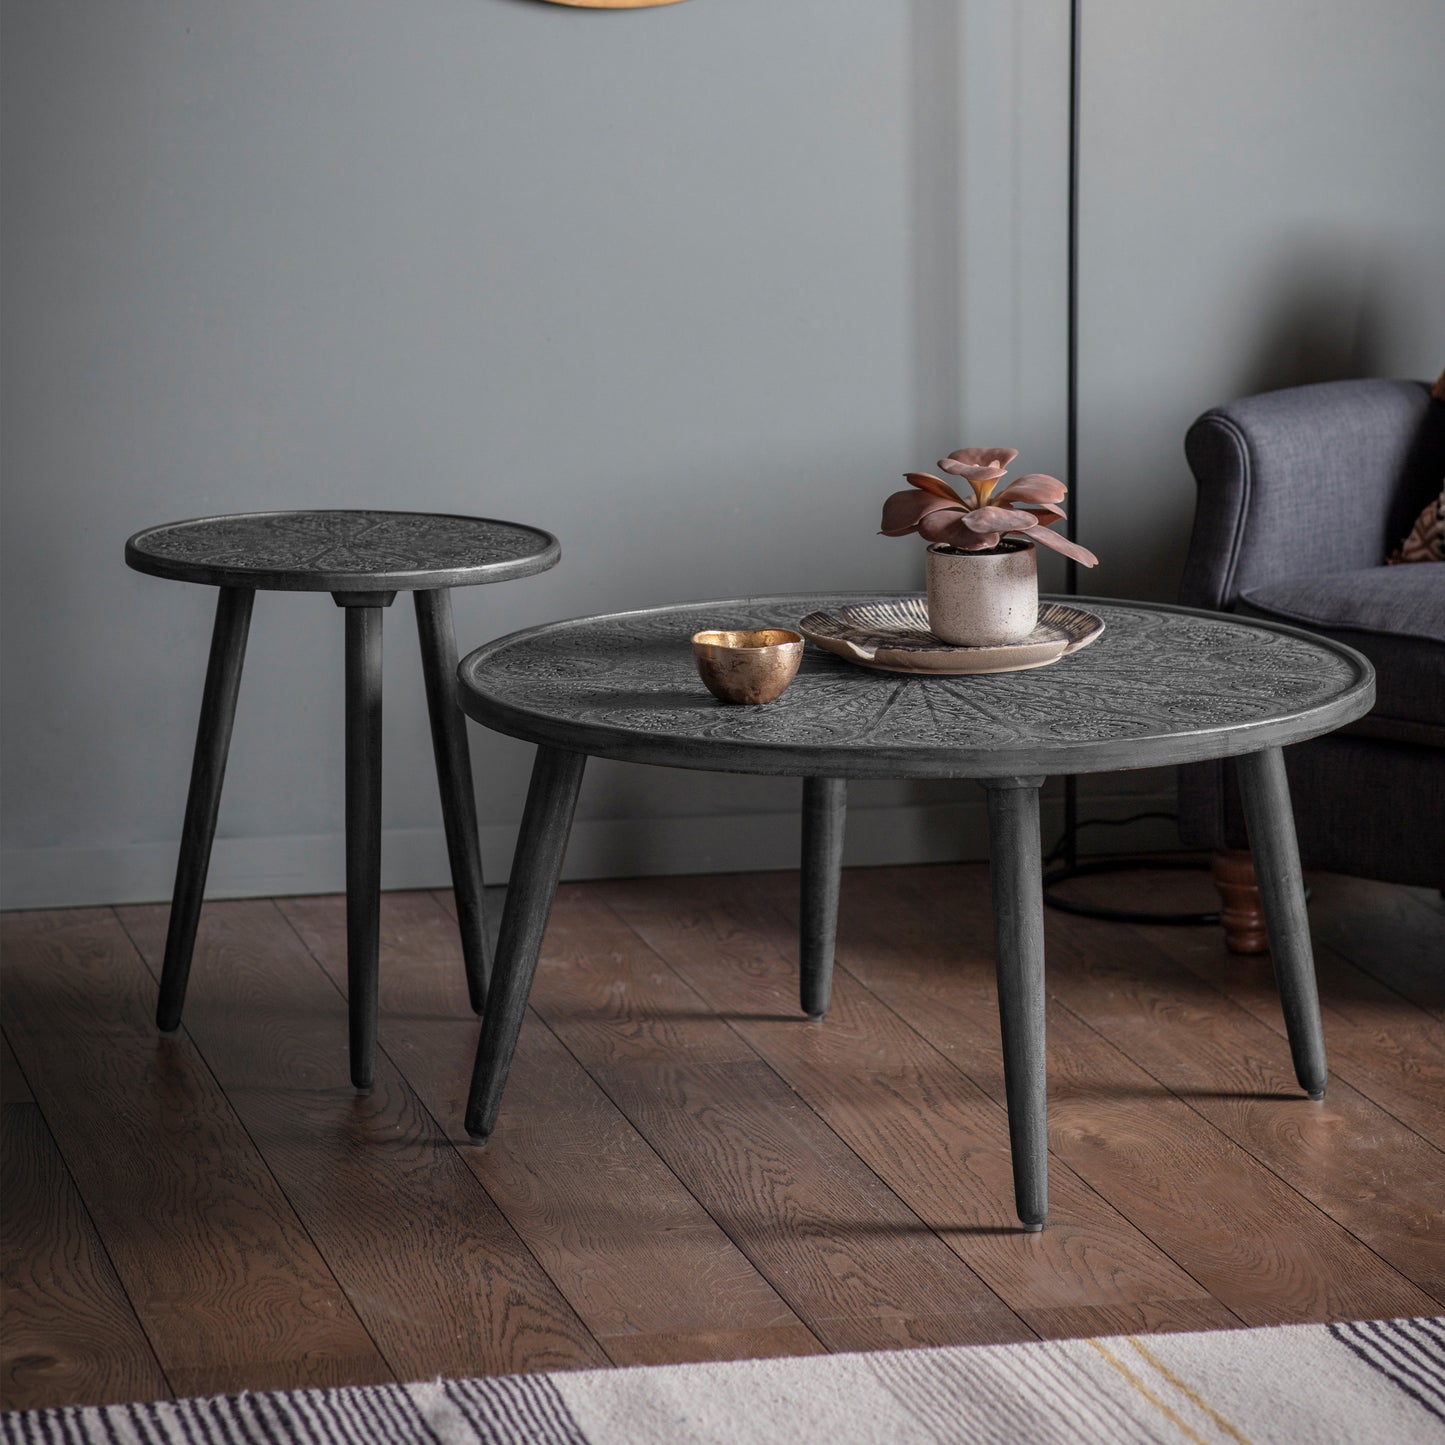 A Home furniture Side Table in Grey Black 450x450x550mm from Kikiathome.co.uk, adding a touch of Interior decor to any living room.